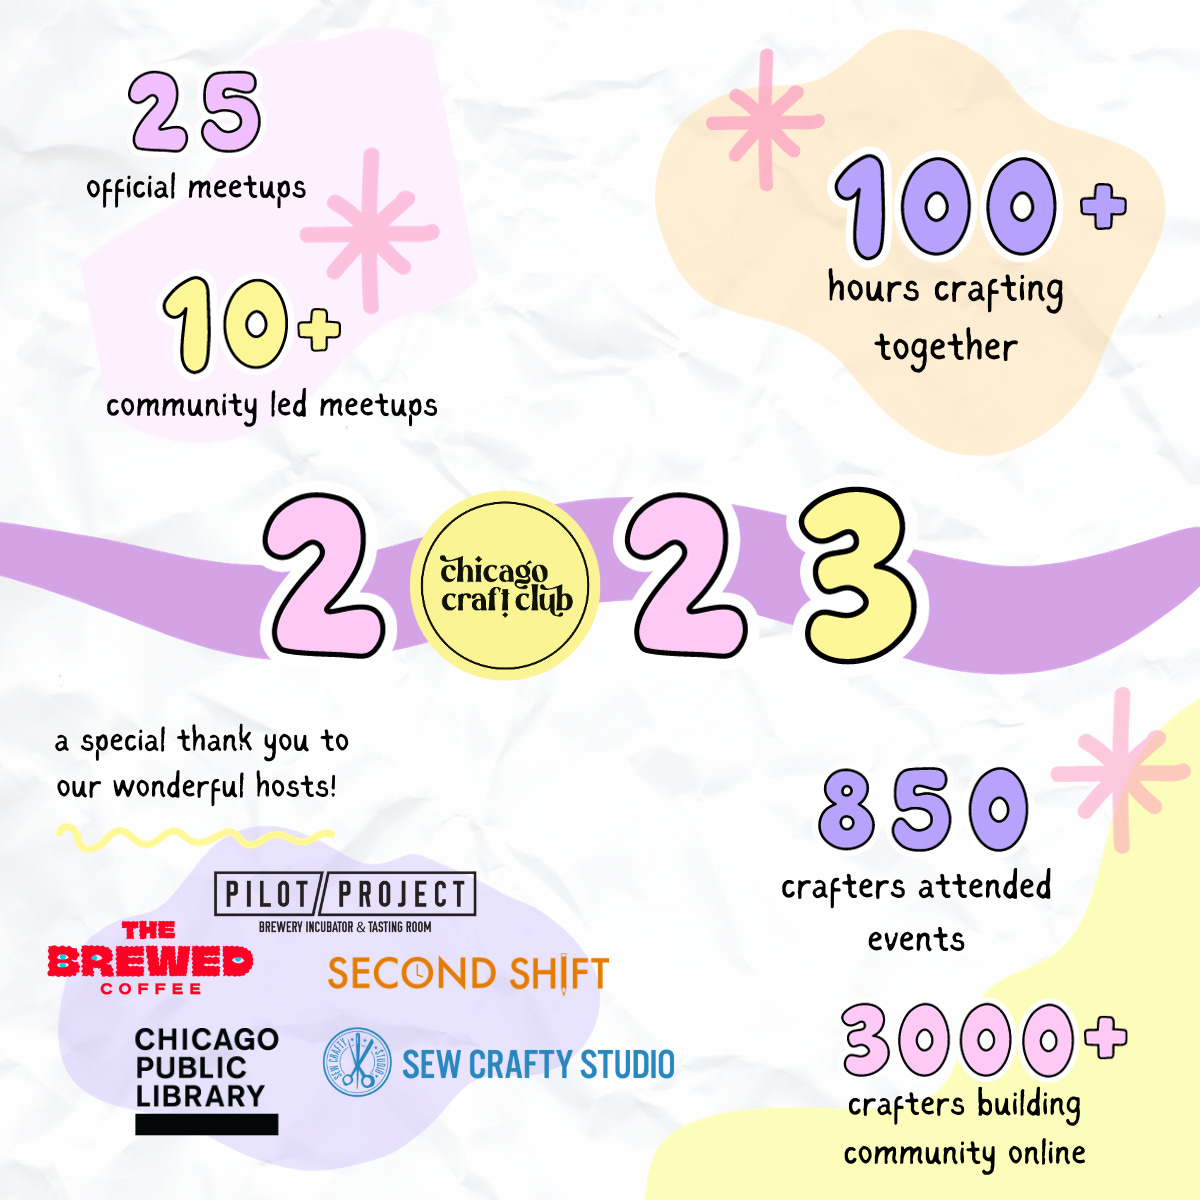 25 official meetups, 100+ hours of crafting together, 10+ community led meetups, 850 crafters attended events, 3000+ crafters building community online. Thank you to our hosts the Brewed coffee, Pilot Project Brewing, Second Shift Coworking, the Chicago Public Library, and Sew Crafty Studio!